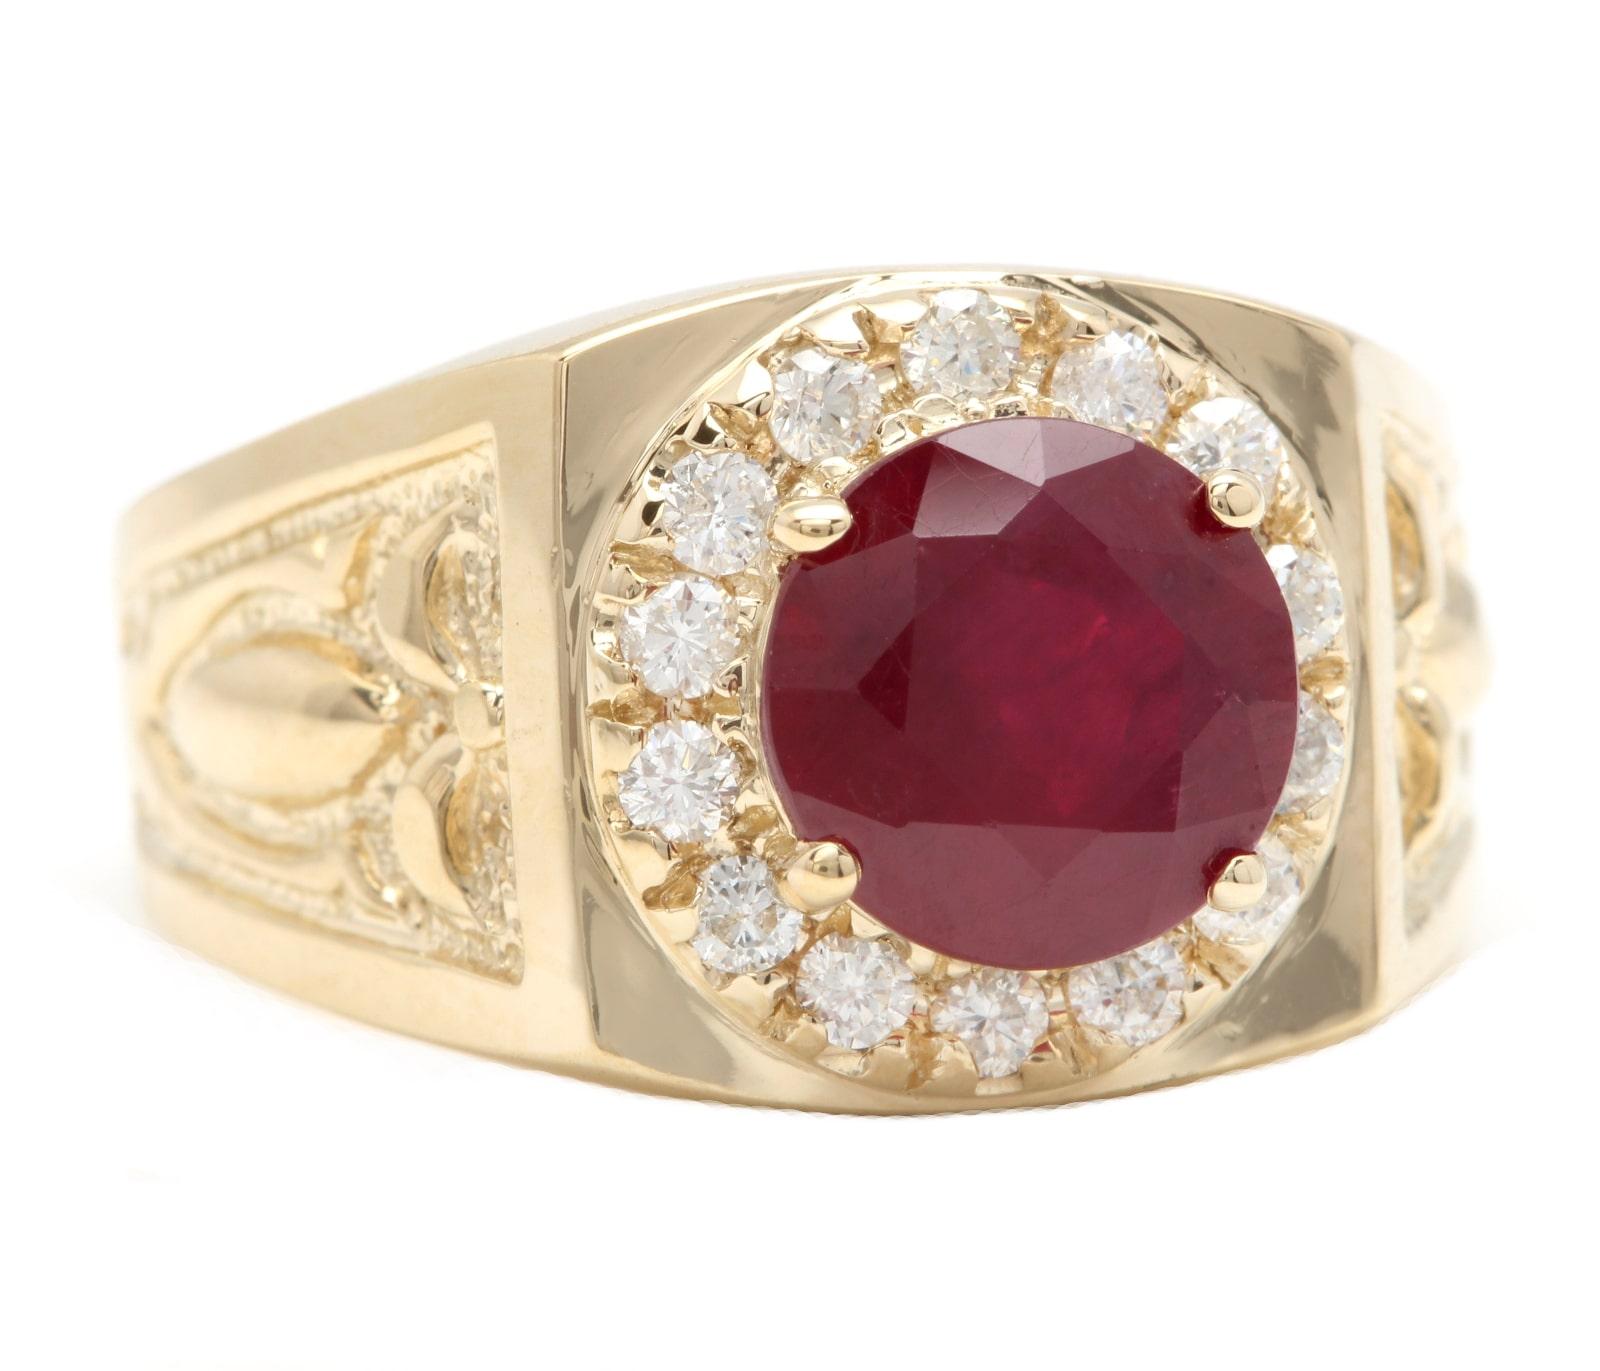 5.00 Carats Impressive Red Ruby and Natural Diamond 14K Solid Yellow Gold Men's Ring

Suggested Replacement Value: $6,500.00

Total Red Ruby Weight is: Approx. 4.50 Carats 

Ruby Measures: Approx. 9.20mm

Ruby Treatment: Lead Glass Filling

Natural